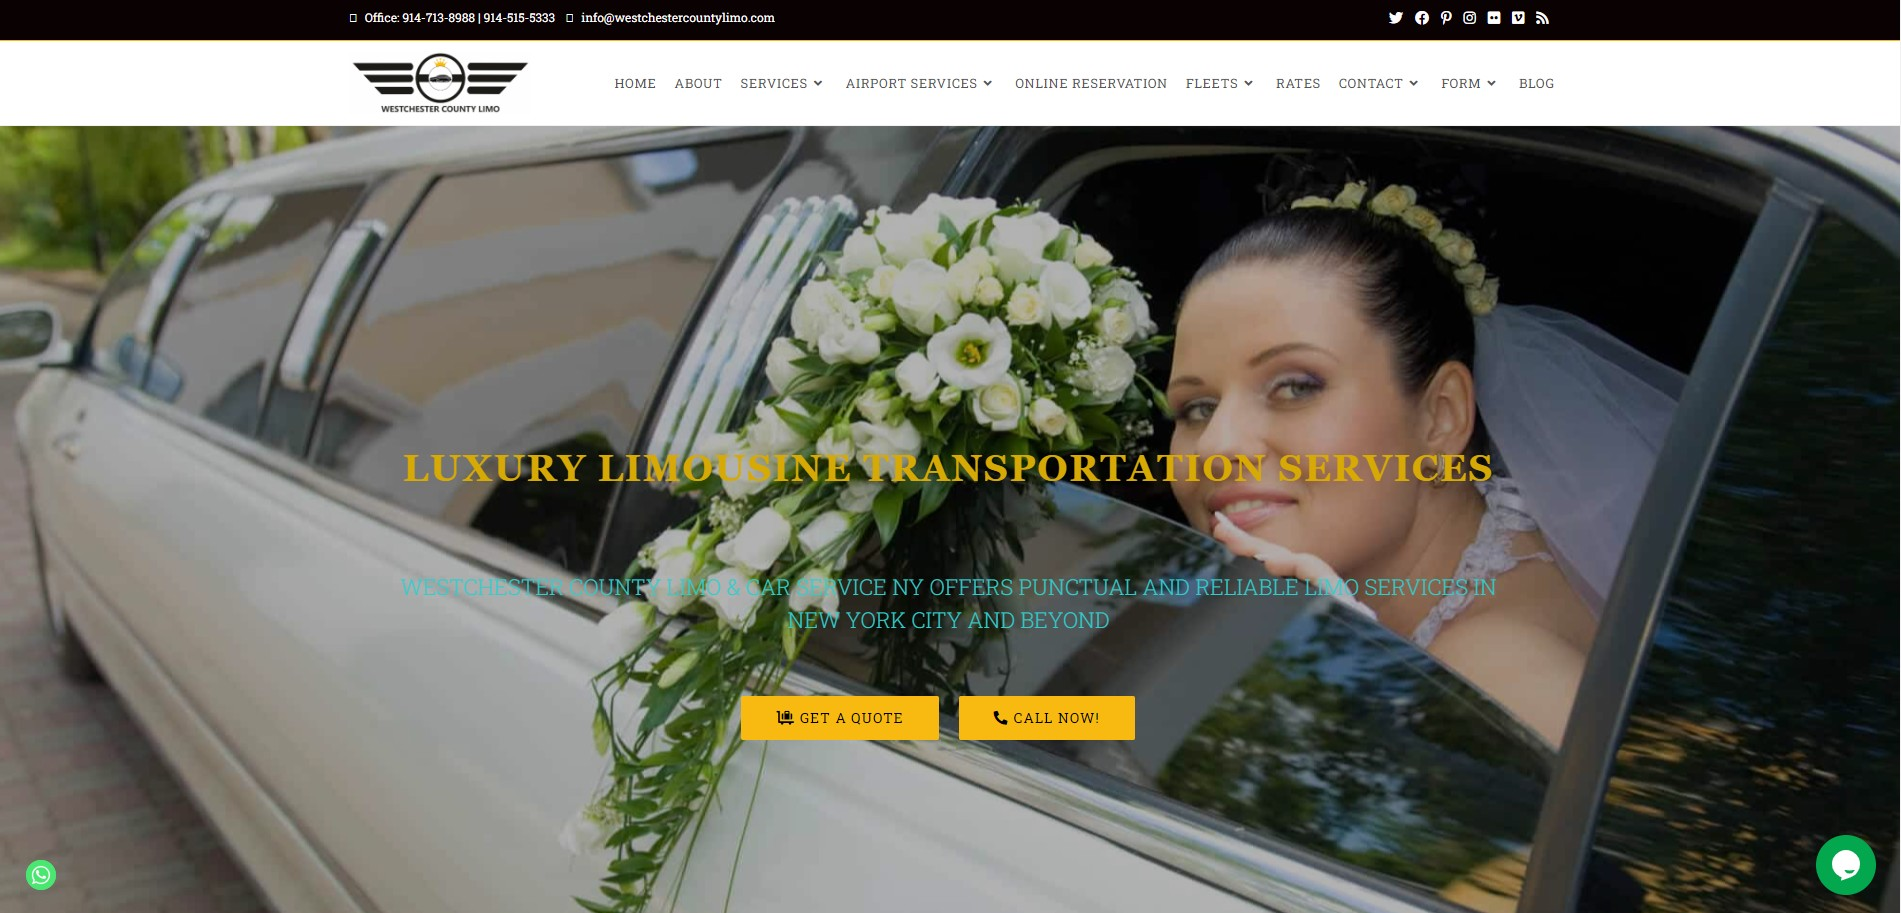 Westchester County Limo & Car Service NY | Limos in NY | 914-515-5333